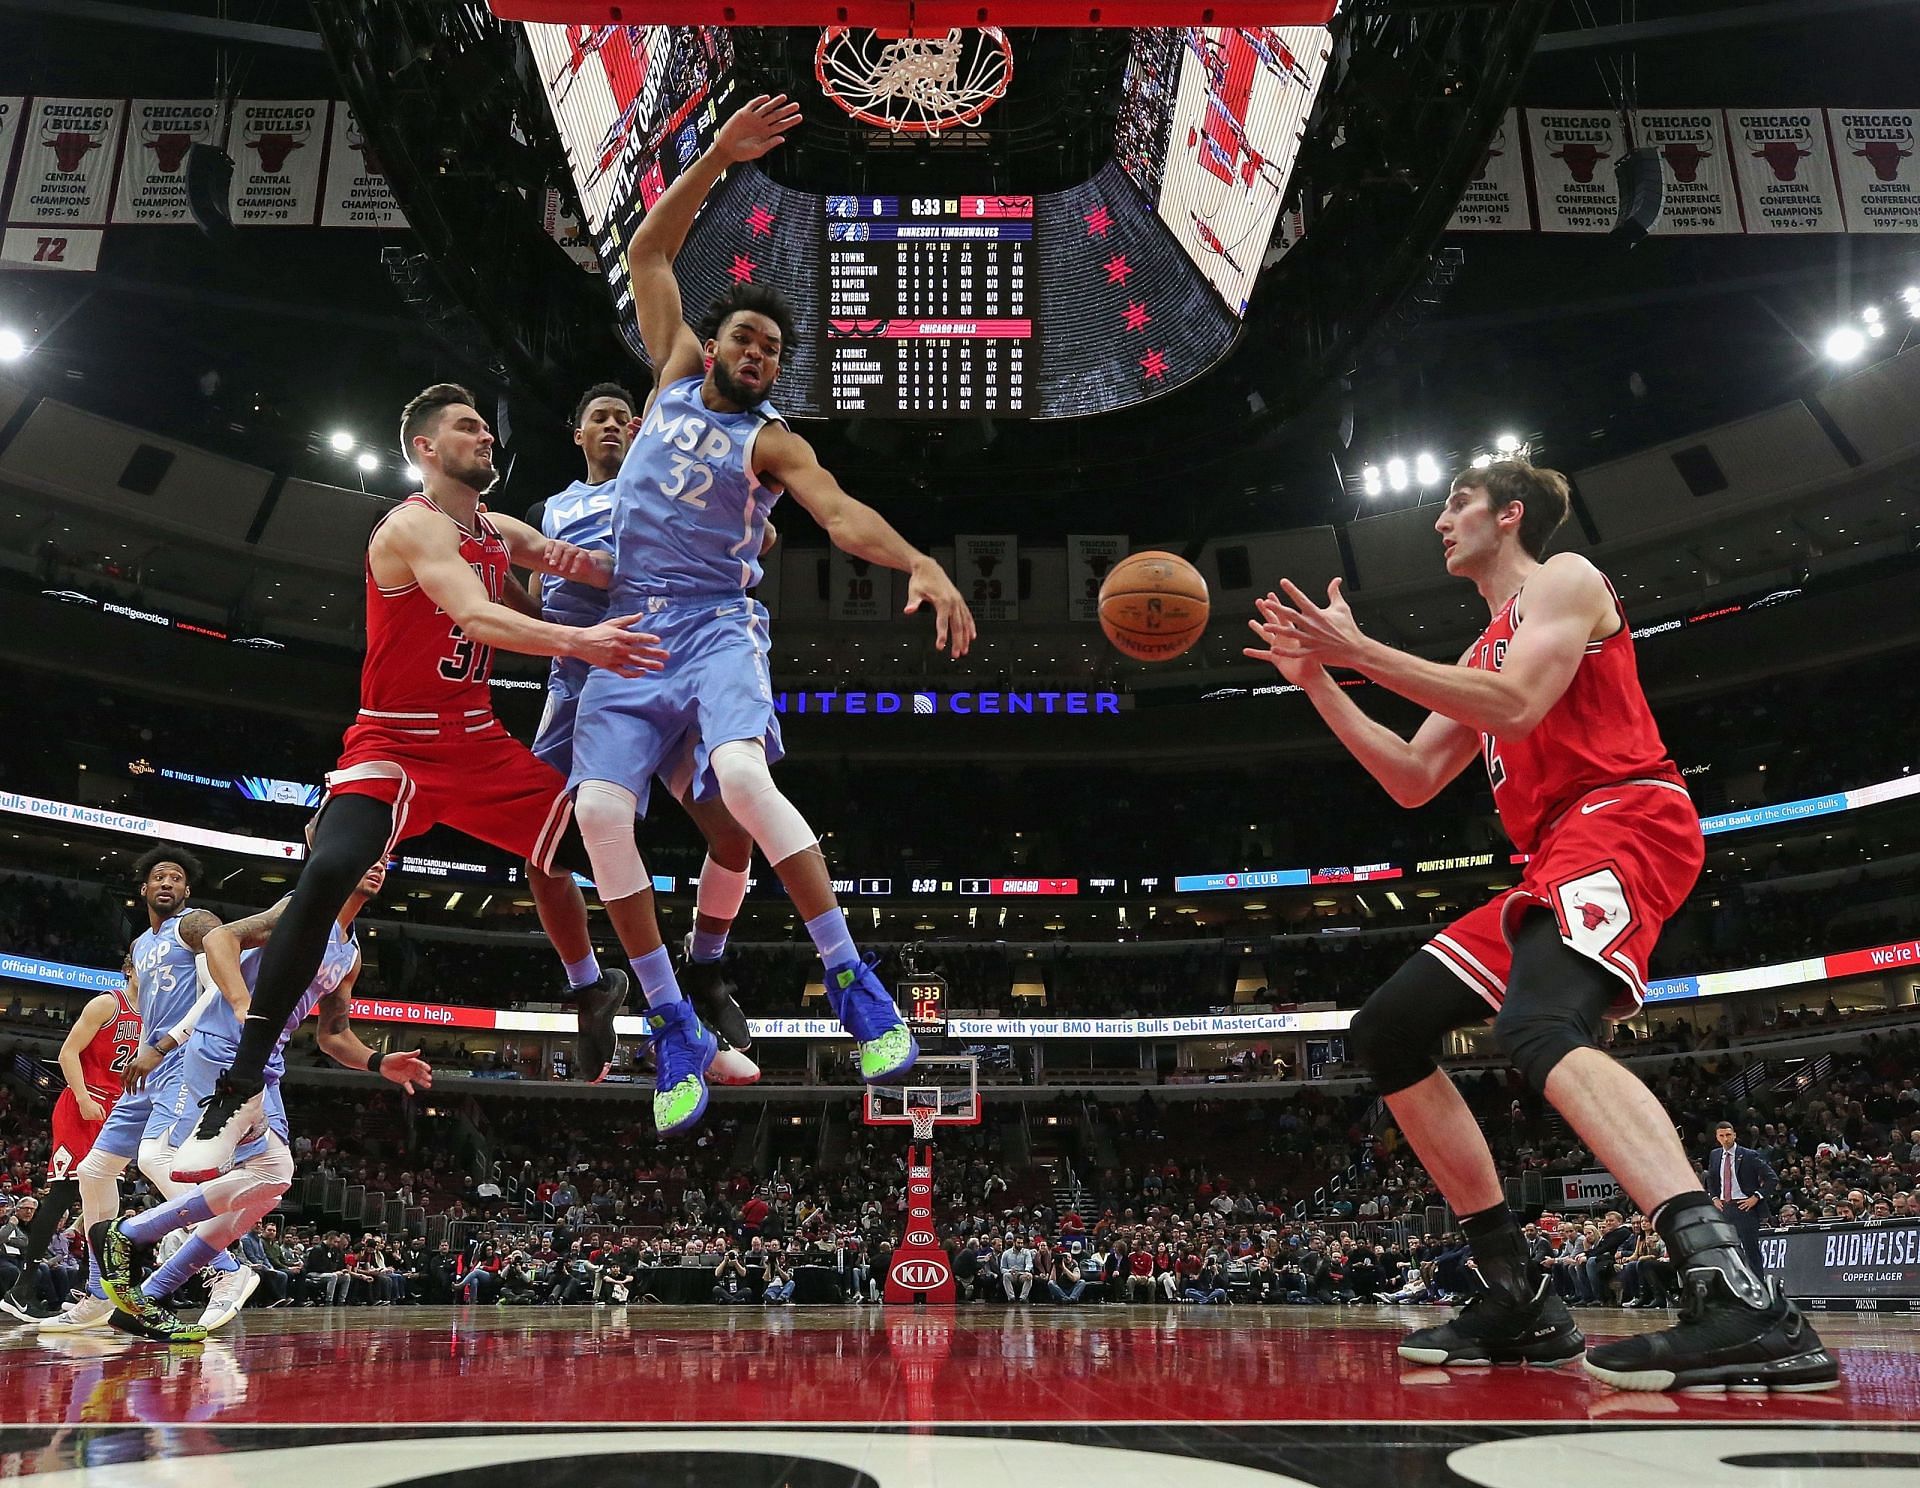 The Chicago Bulls will host the Minnesota Timberwolves on February 11 [Source: Dunking WIth Wolves]